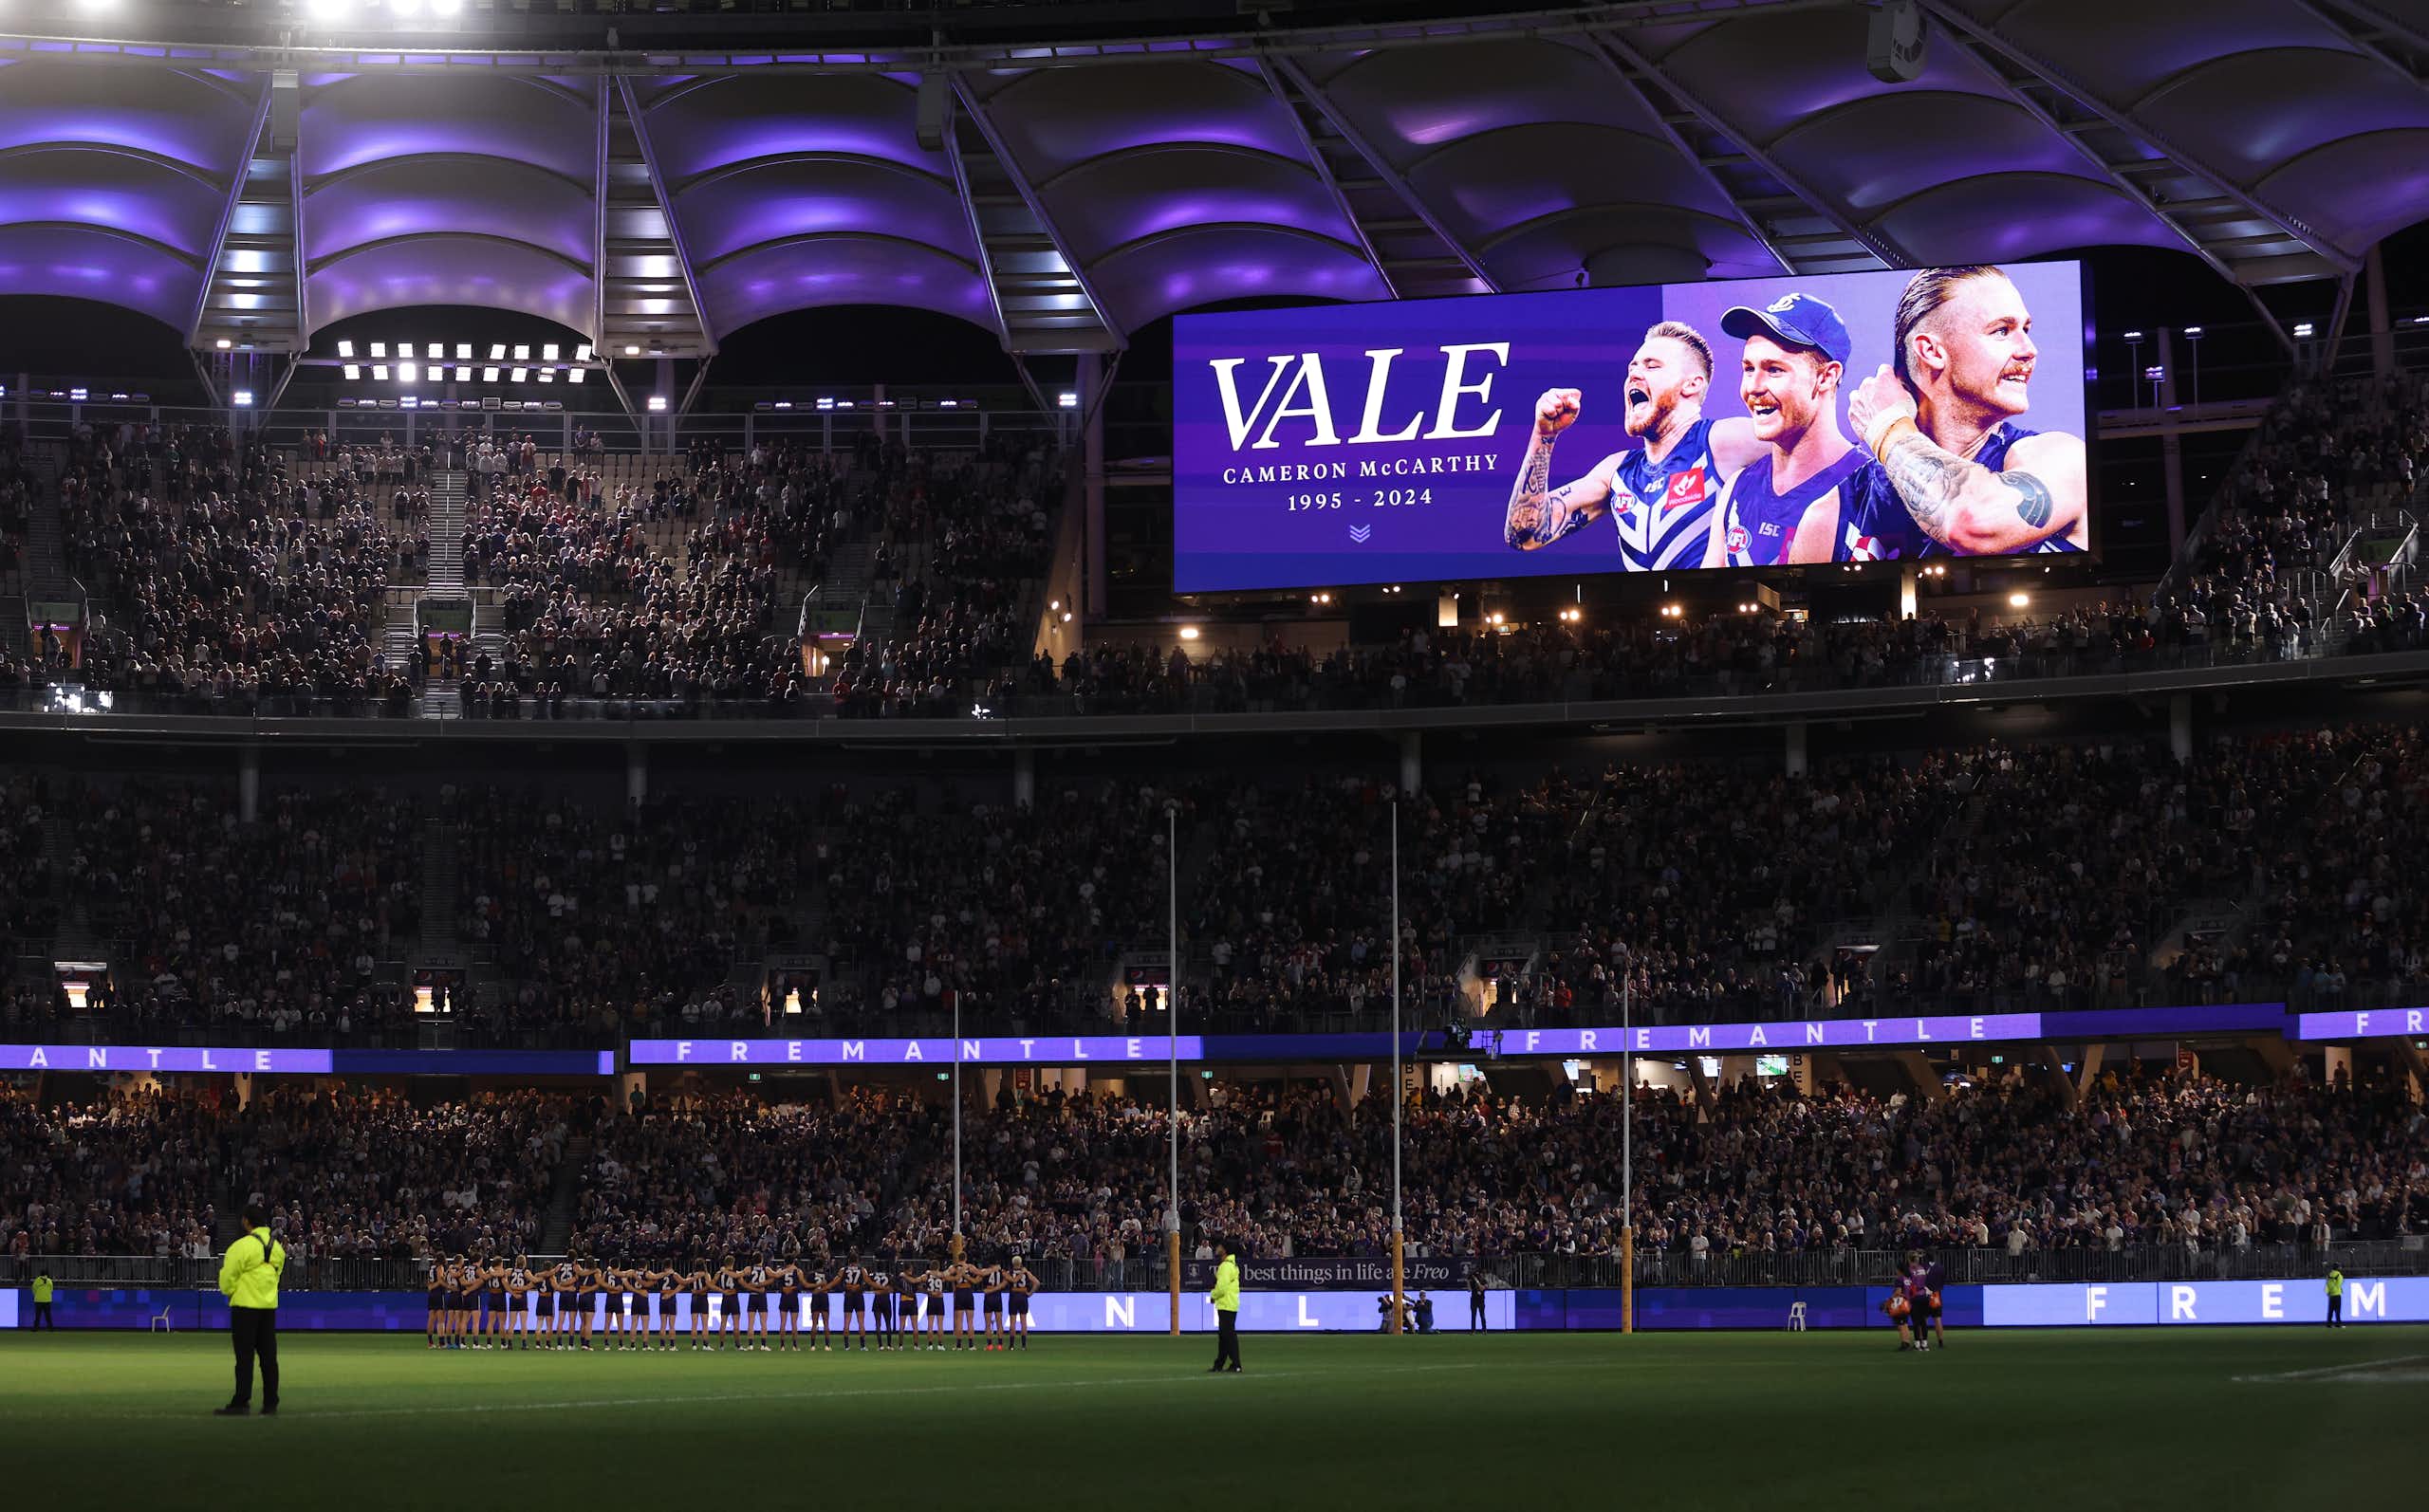 Players line up in tribute to former Fremantle and GWS player Cam McCarthy